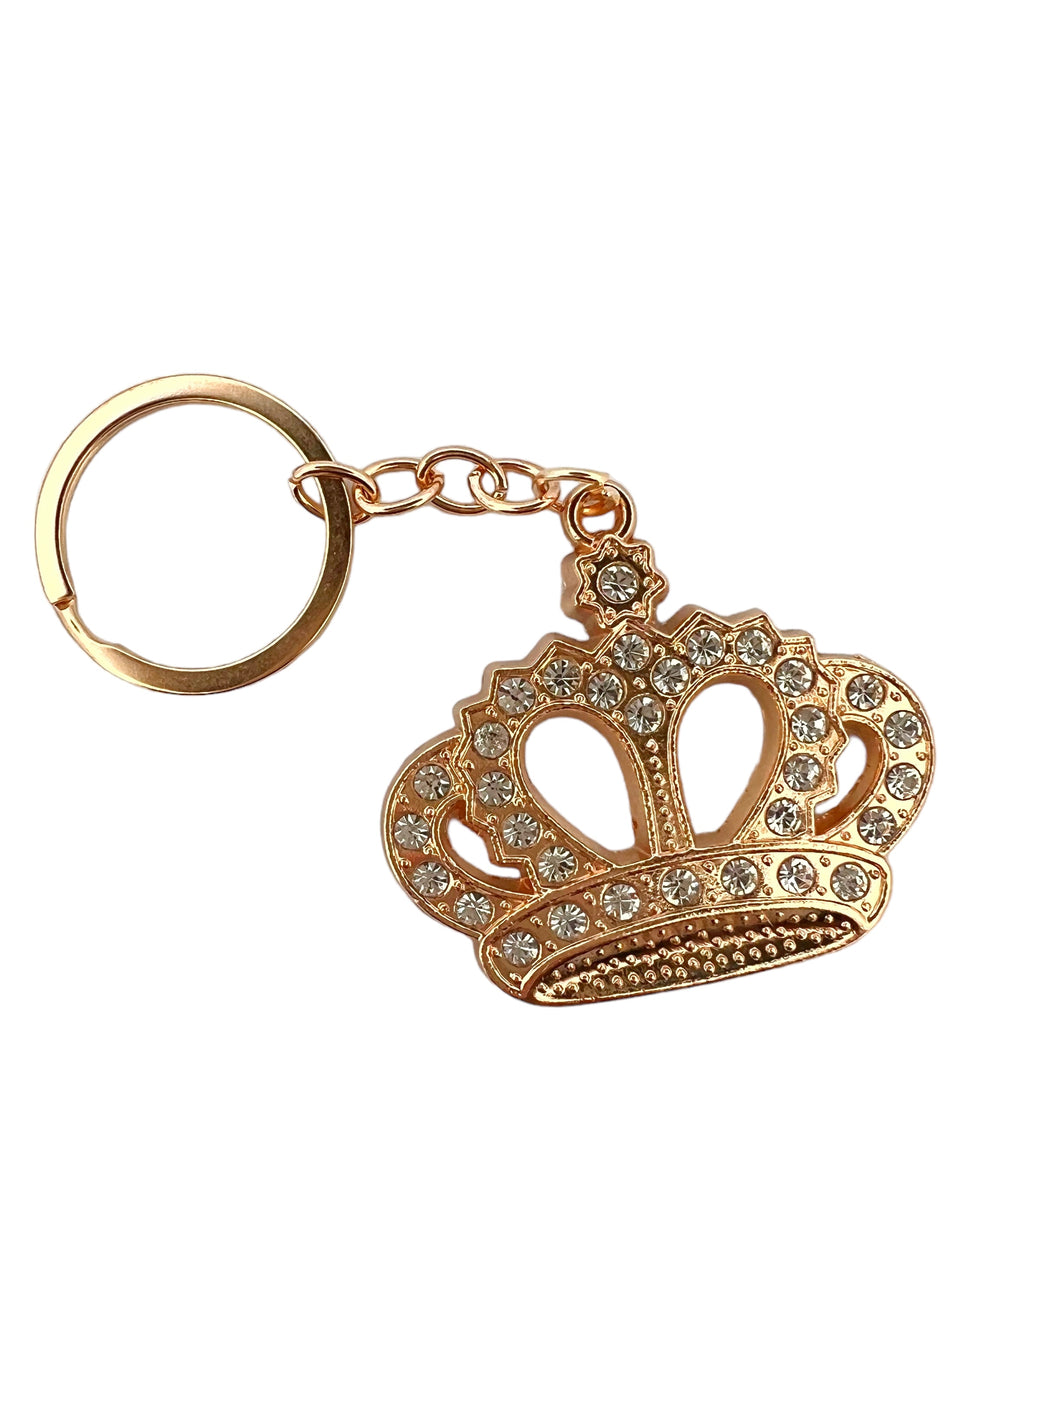 Introducing the adorable Crown Key Ring, the perfect accessory for any tennis enthusiast or lover of all things cute! Crafted with meticulous attention to detail, the key ring features an elegant and gorgeous crown. Because you are worth it! 